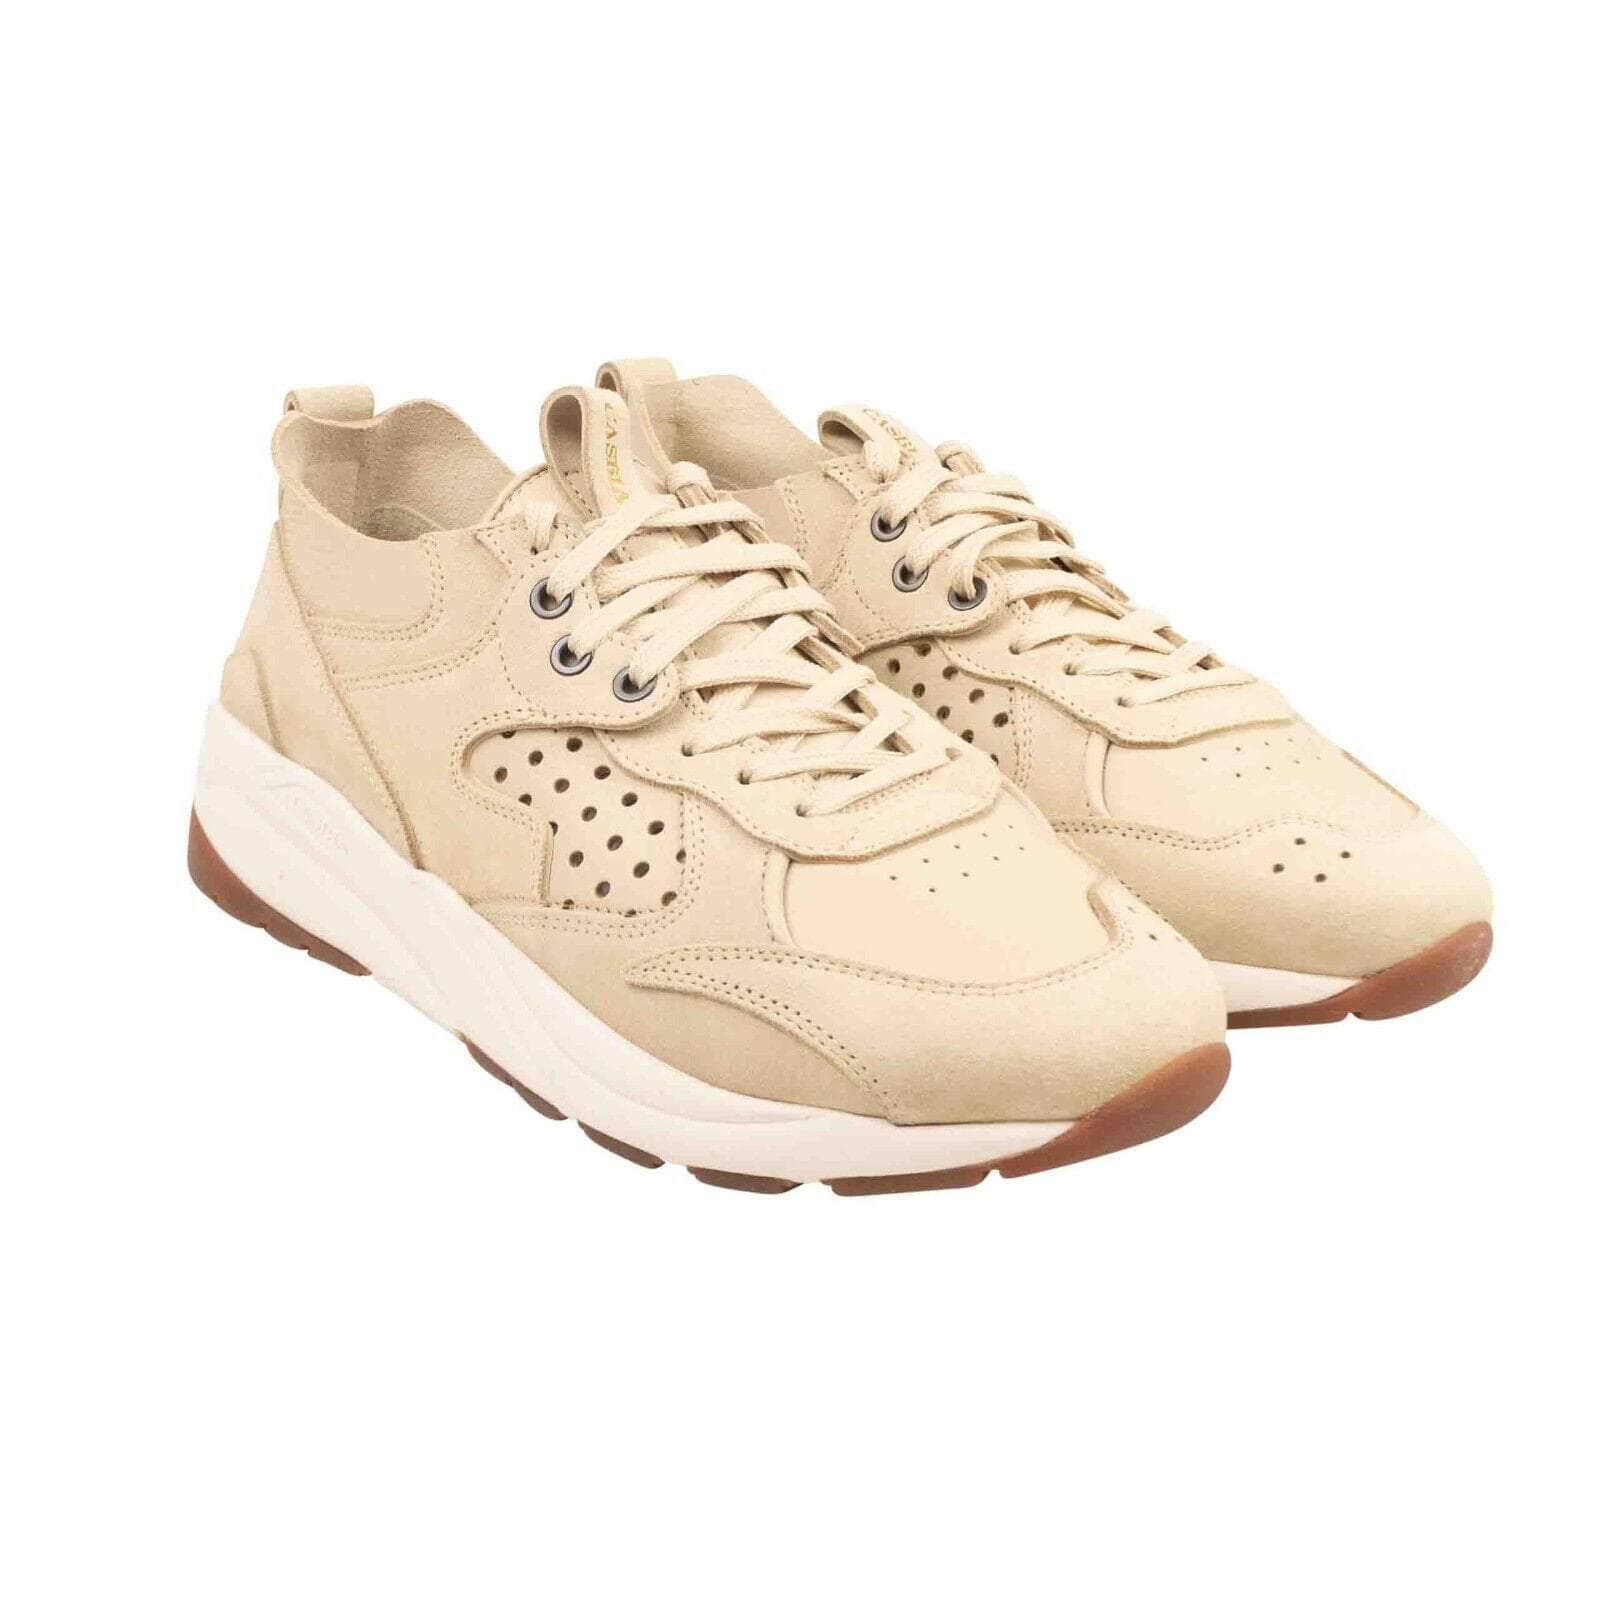 Casbia casbia, channelenable-all, chicmi, couponcollection, gender-mens, main-shoes, mens-shoes, MixedApparel, size-40, size-41, size-42, size-43, size-44, size-45, size-46, under-250 Beige Skin Veloce Low Top Suede Sneakers